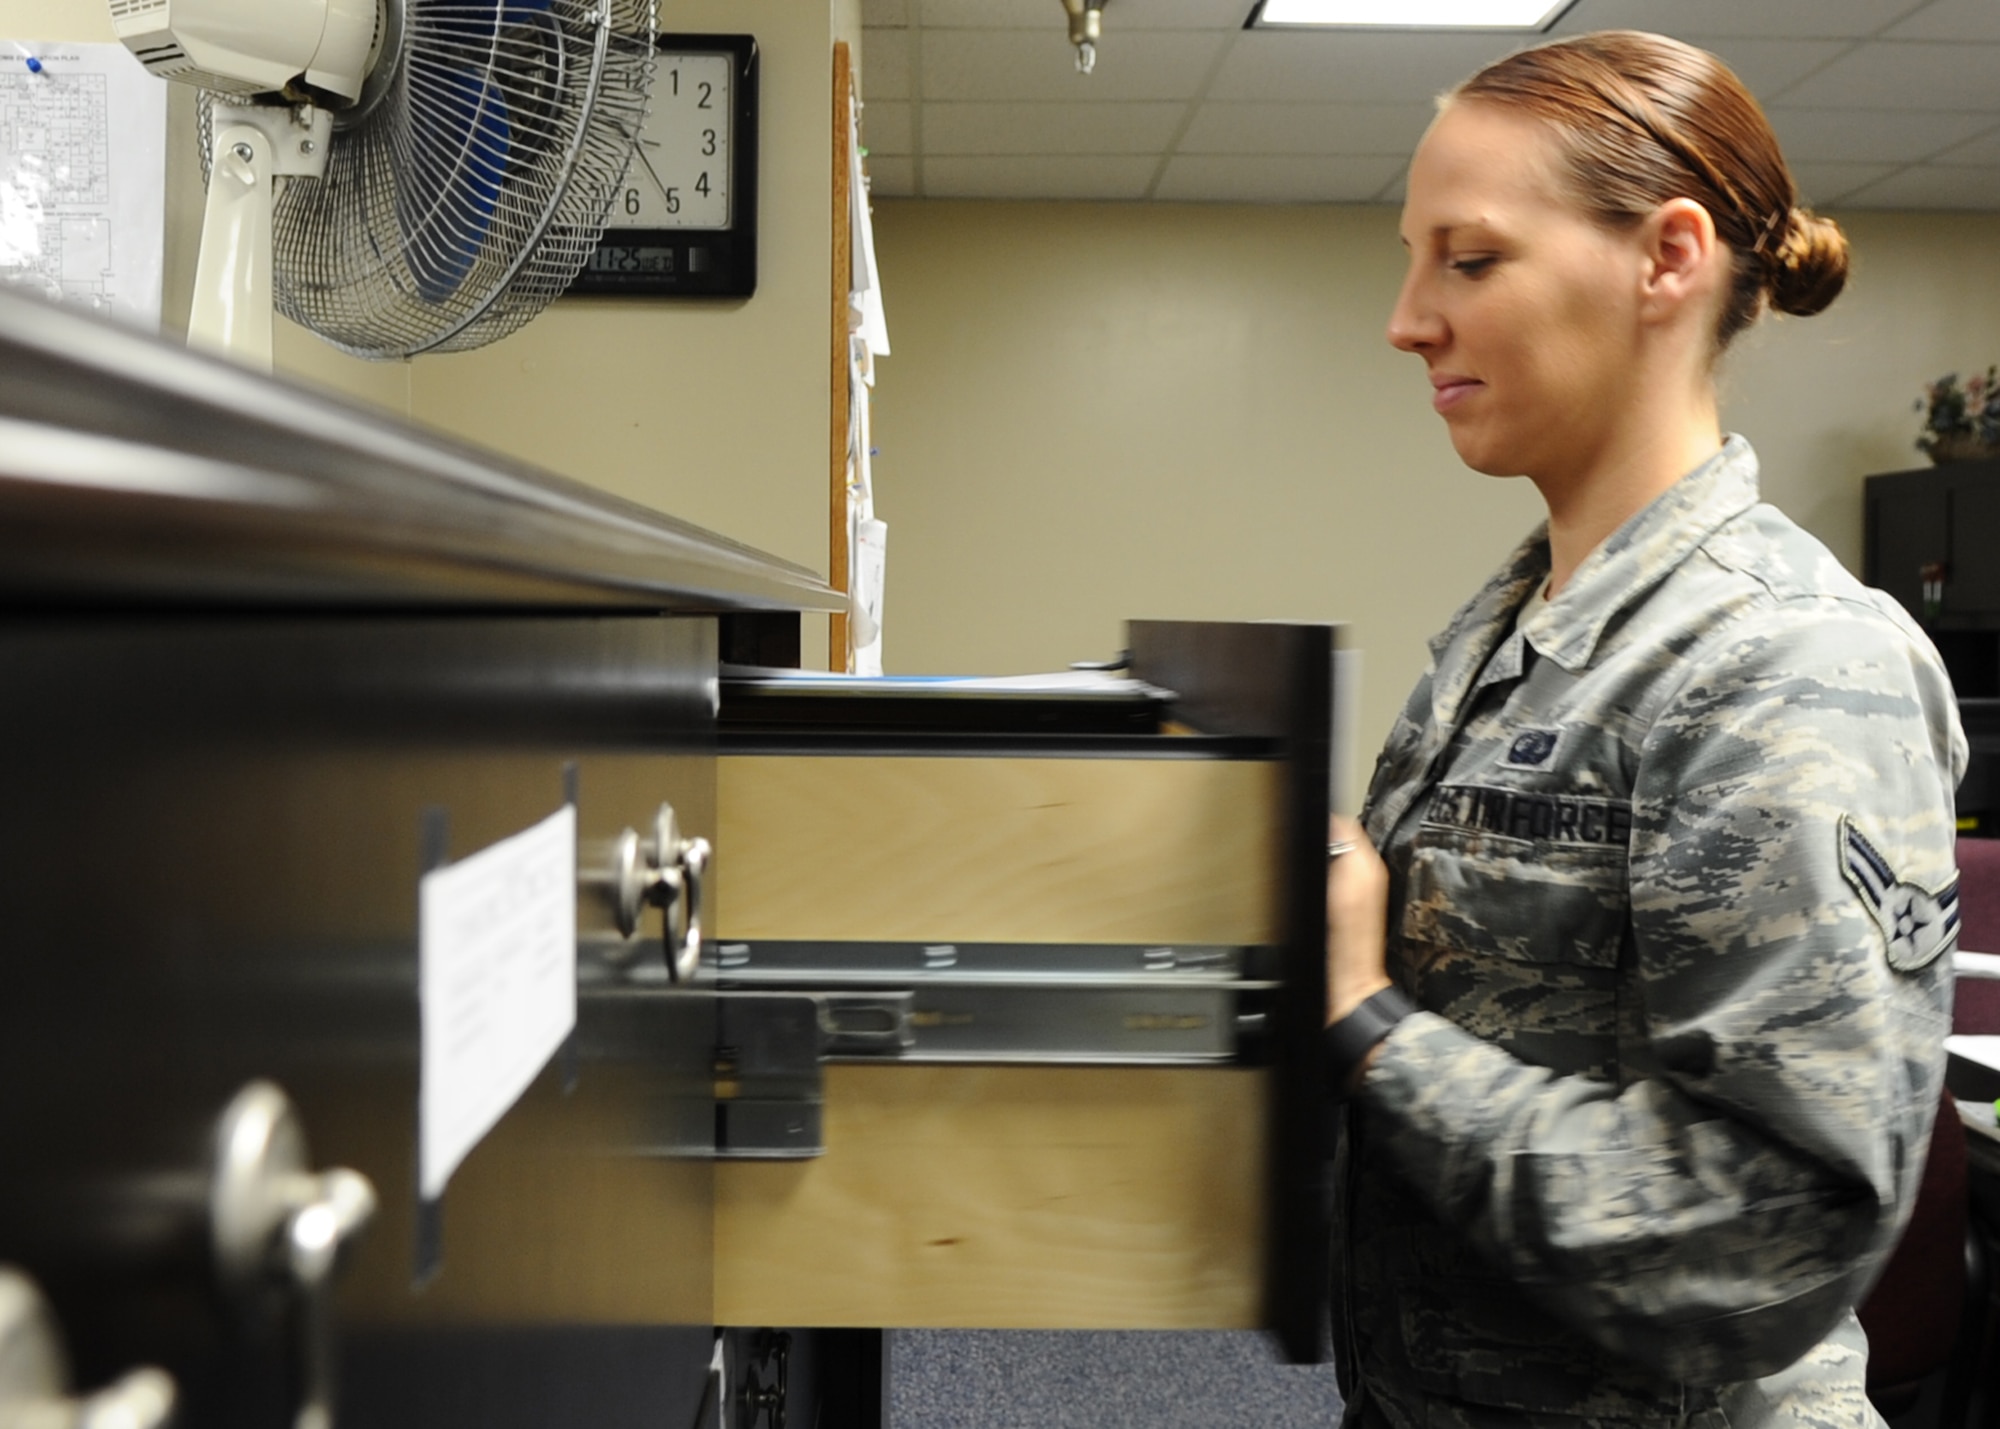 Airman 1st Class Elizabeth Davis, 325th Comptroller Squadron financial services technician, prepares to organize files regarding financial documentation from service members Nov. 25 at the Base Support Center. The Customer Service section provides pay, allowances and entitlement assistance. (U.S. Air Force photo by Senior Airman Ty-Rico Lea/Released)